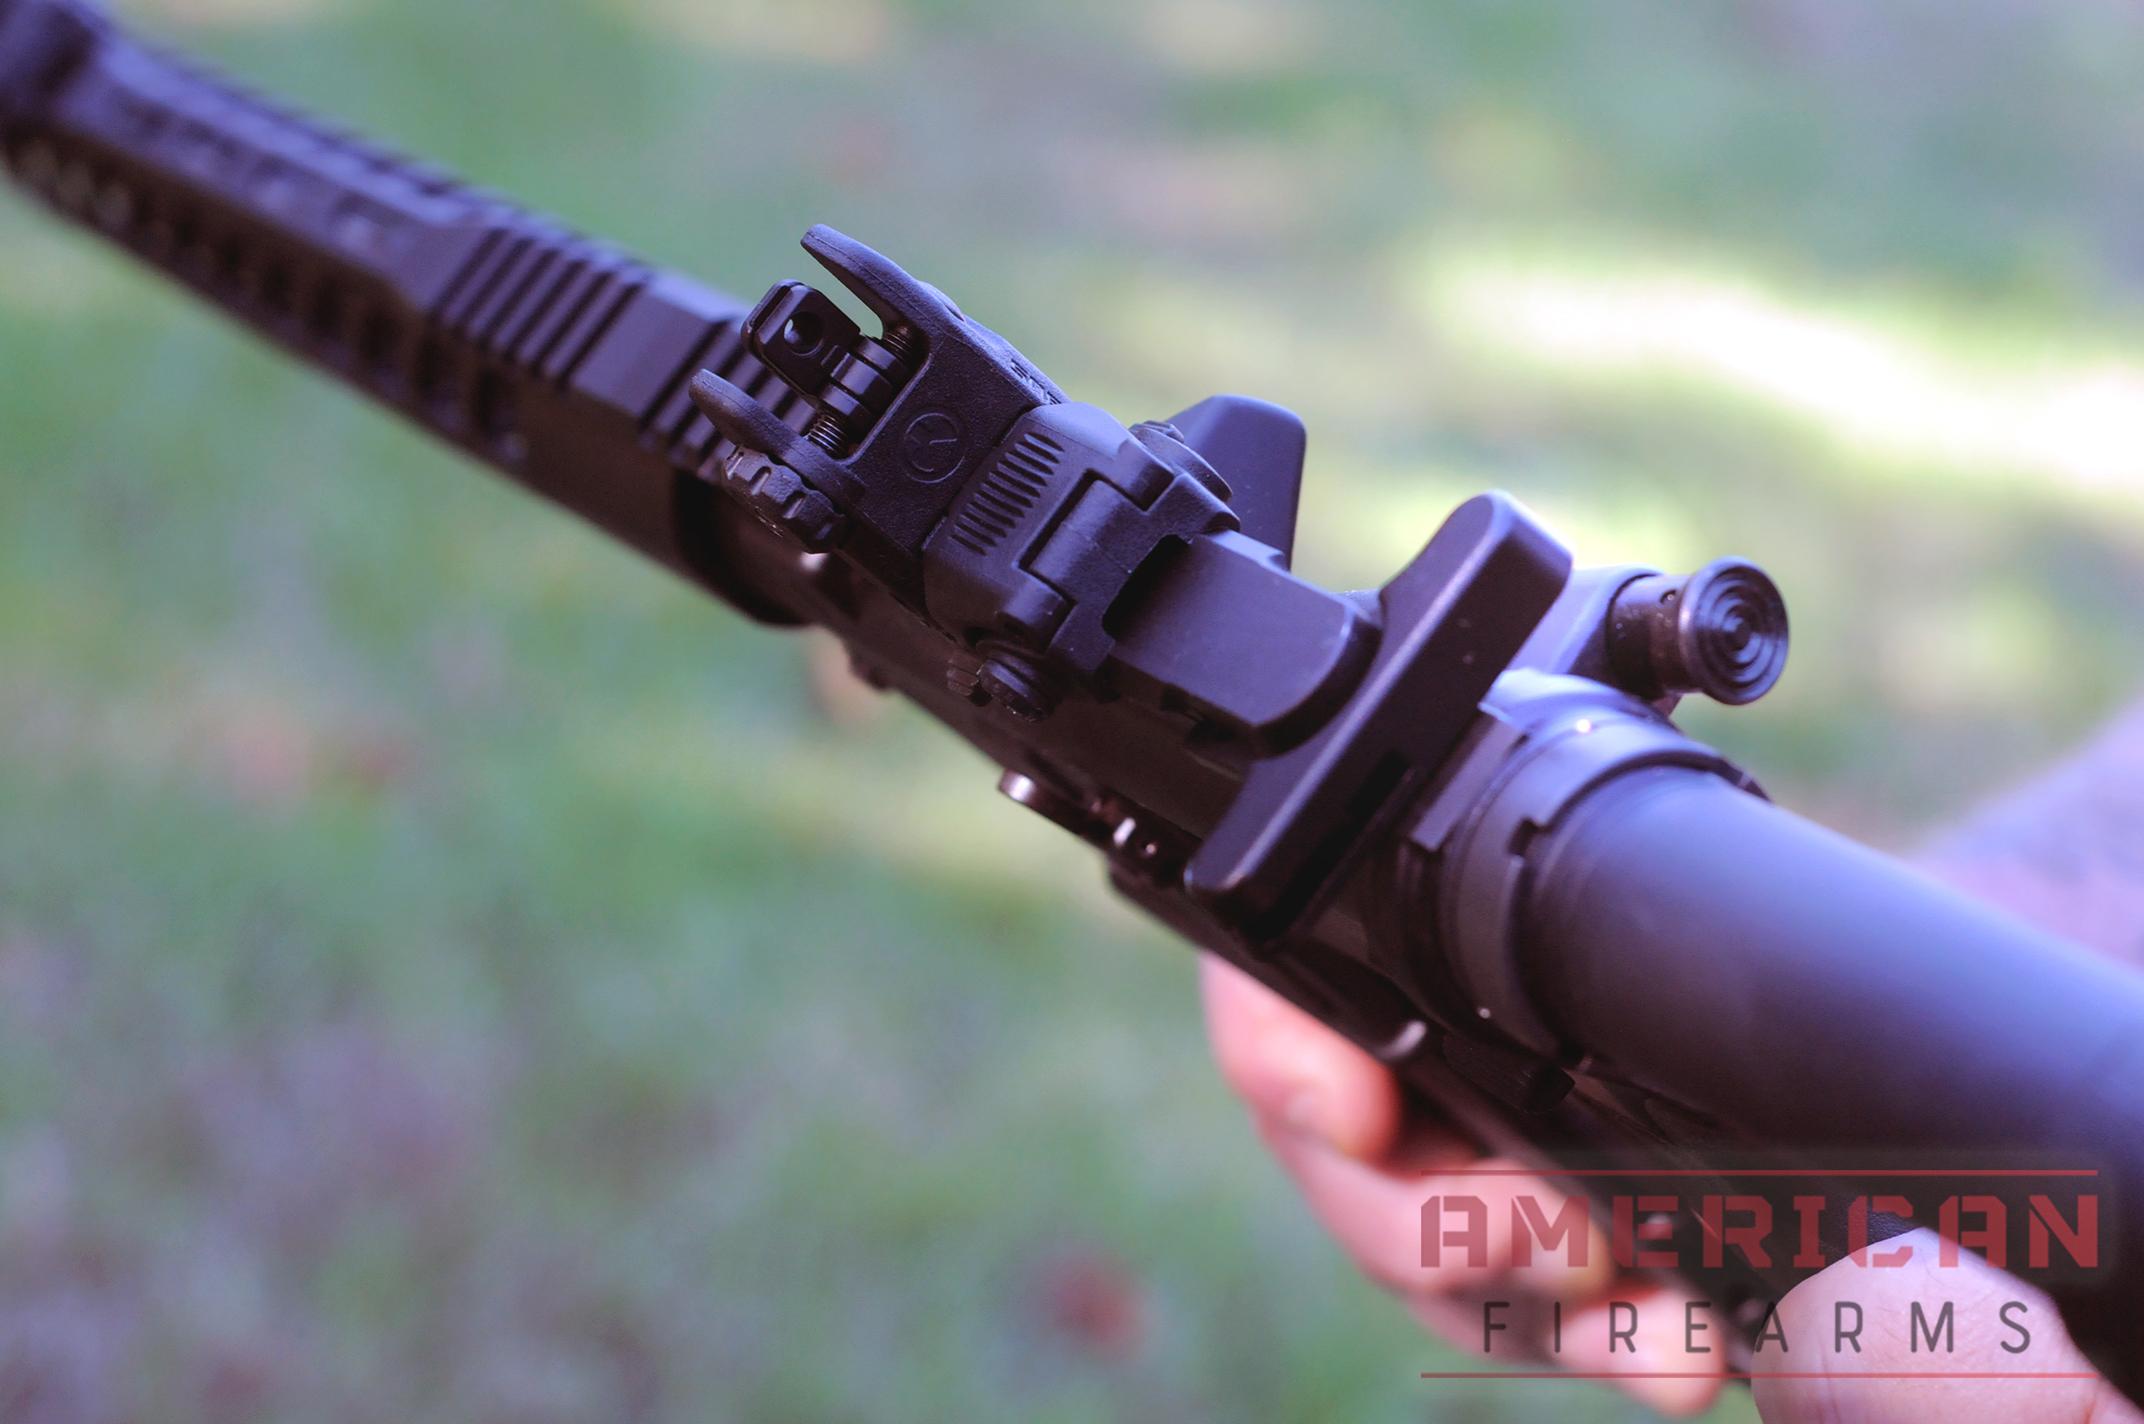 My PA-15 came with Magpul MBUS front and rears, which are great, but I added a magnified optic for more range.